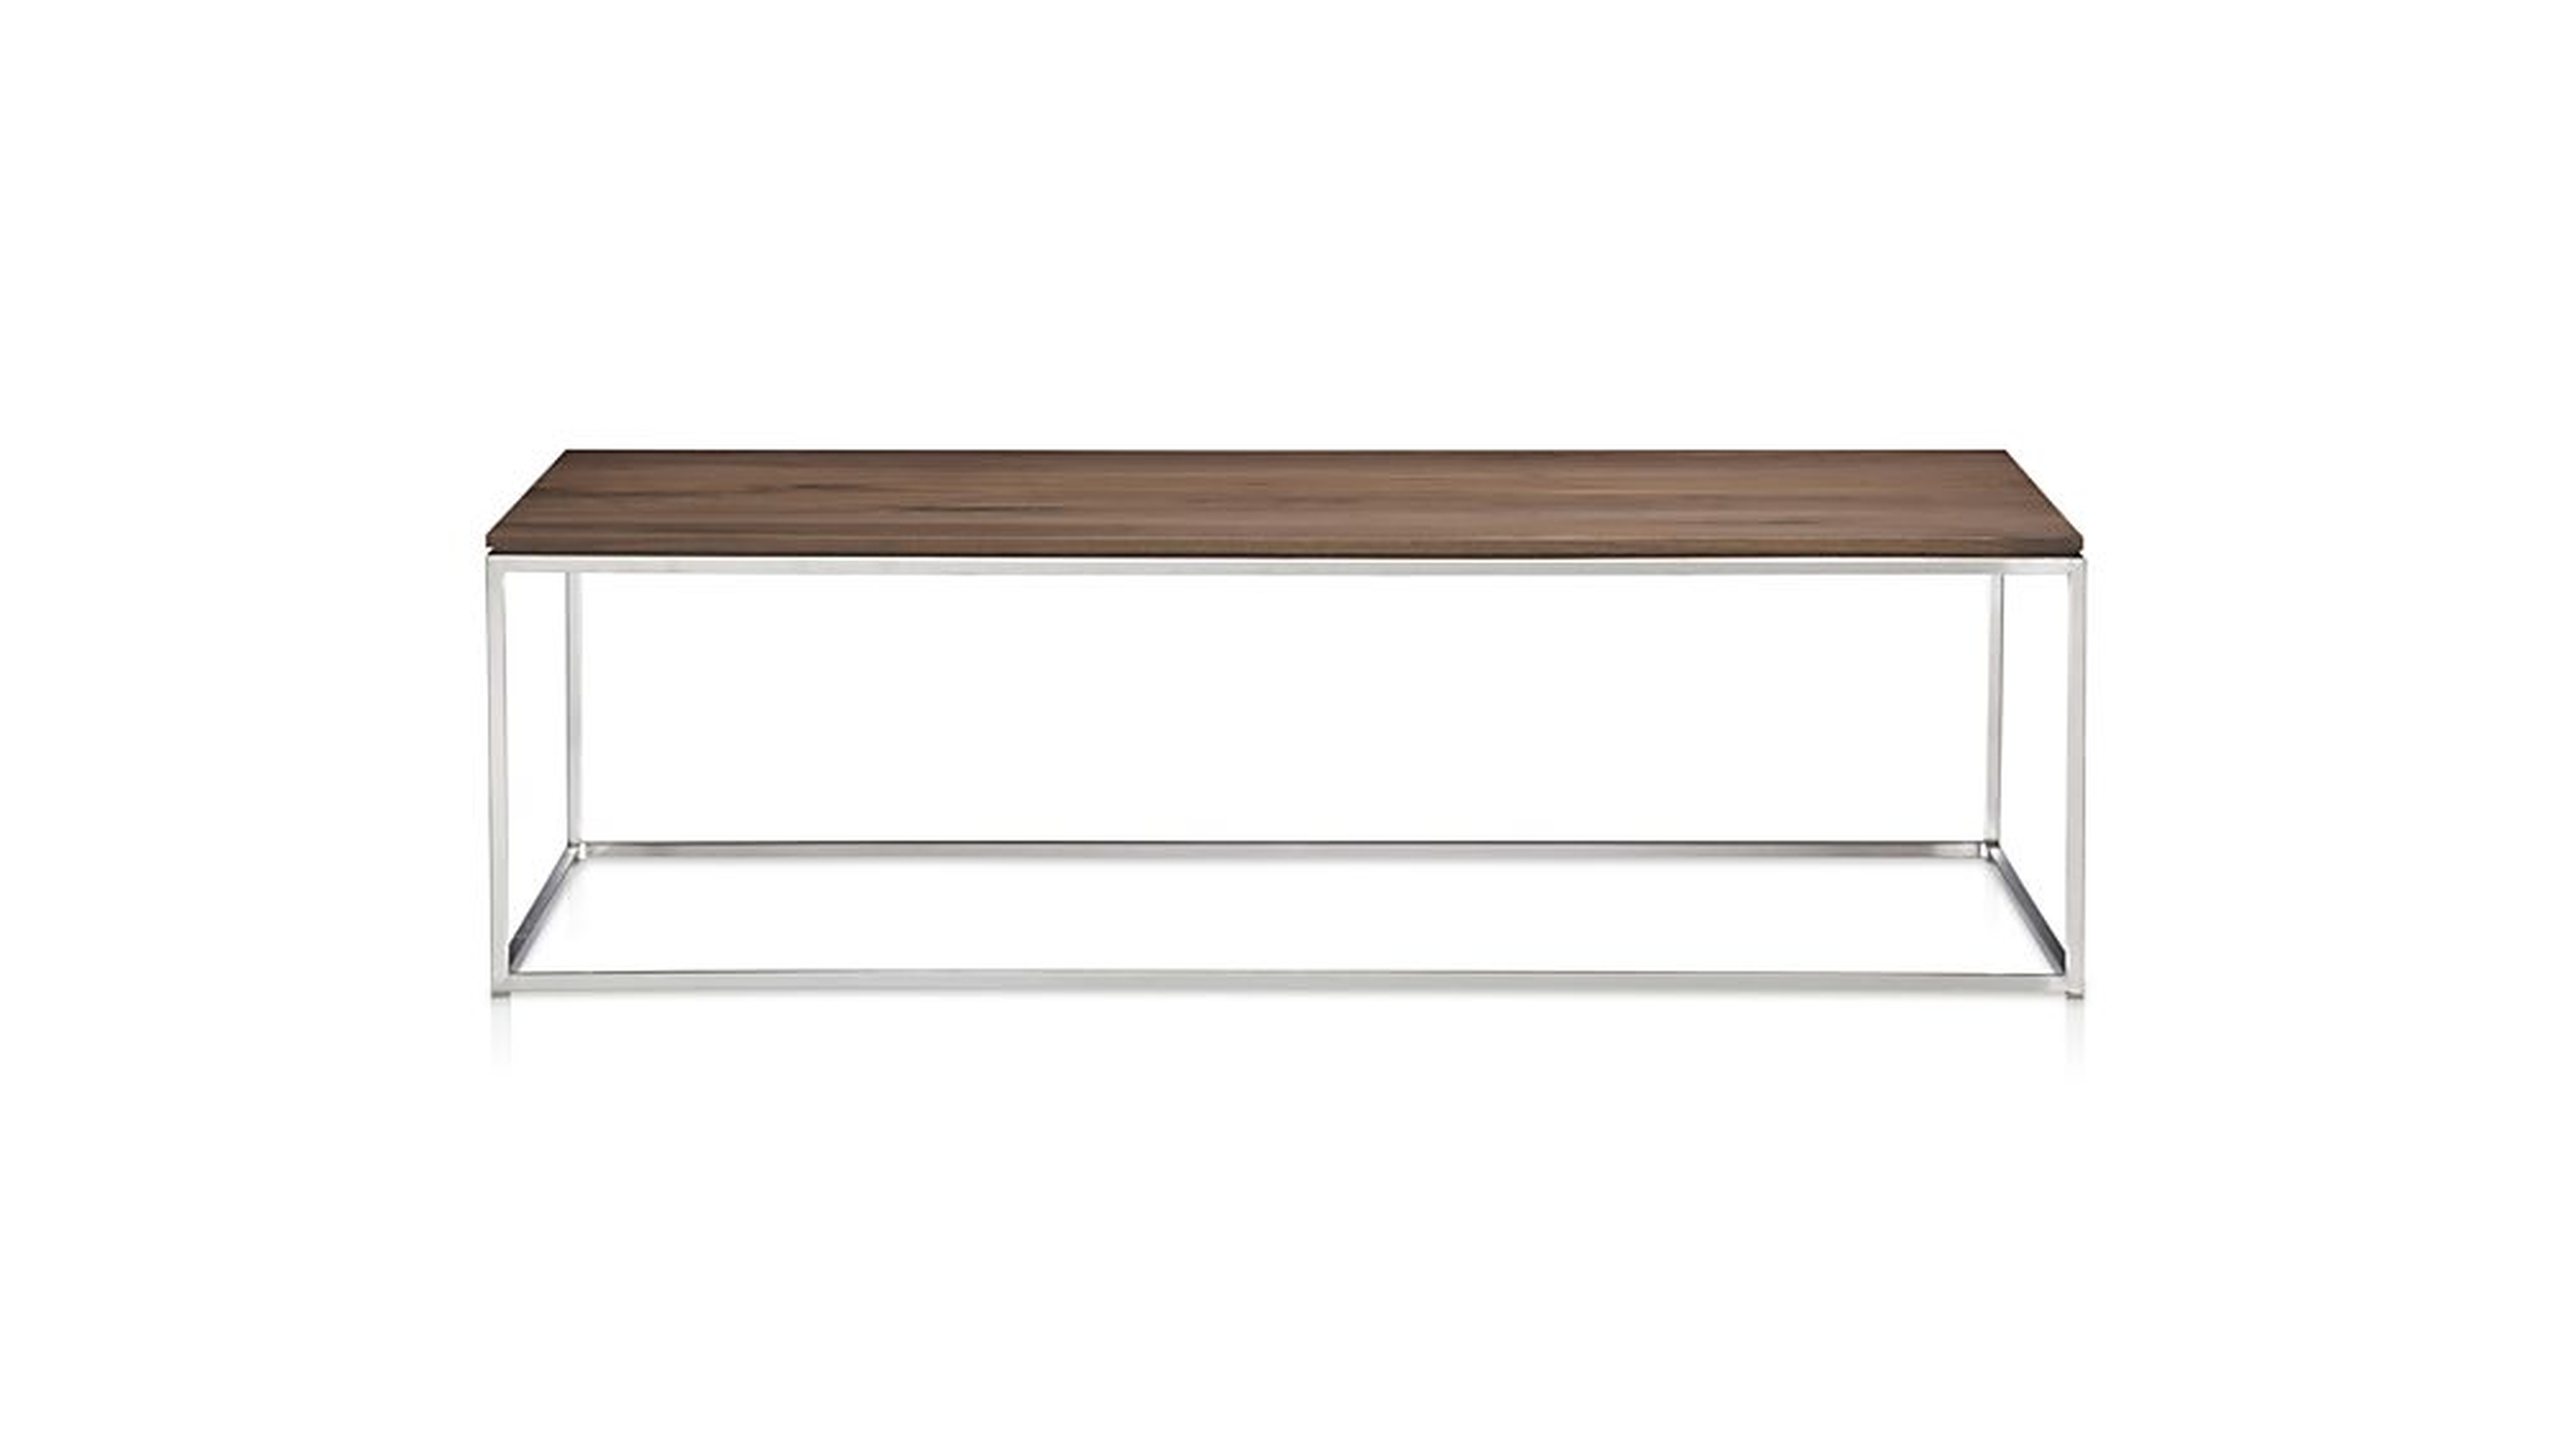 Frame Medium Coffee Table - Crate and Barrel